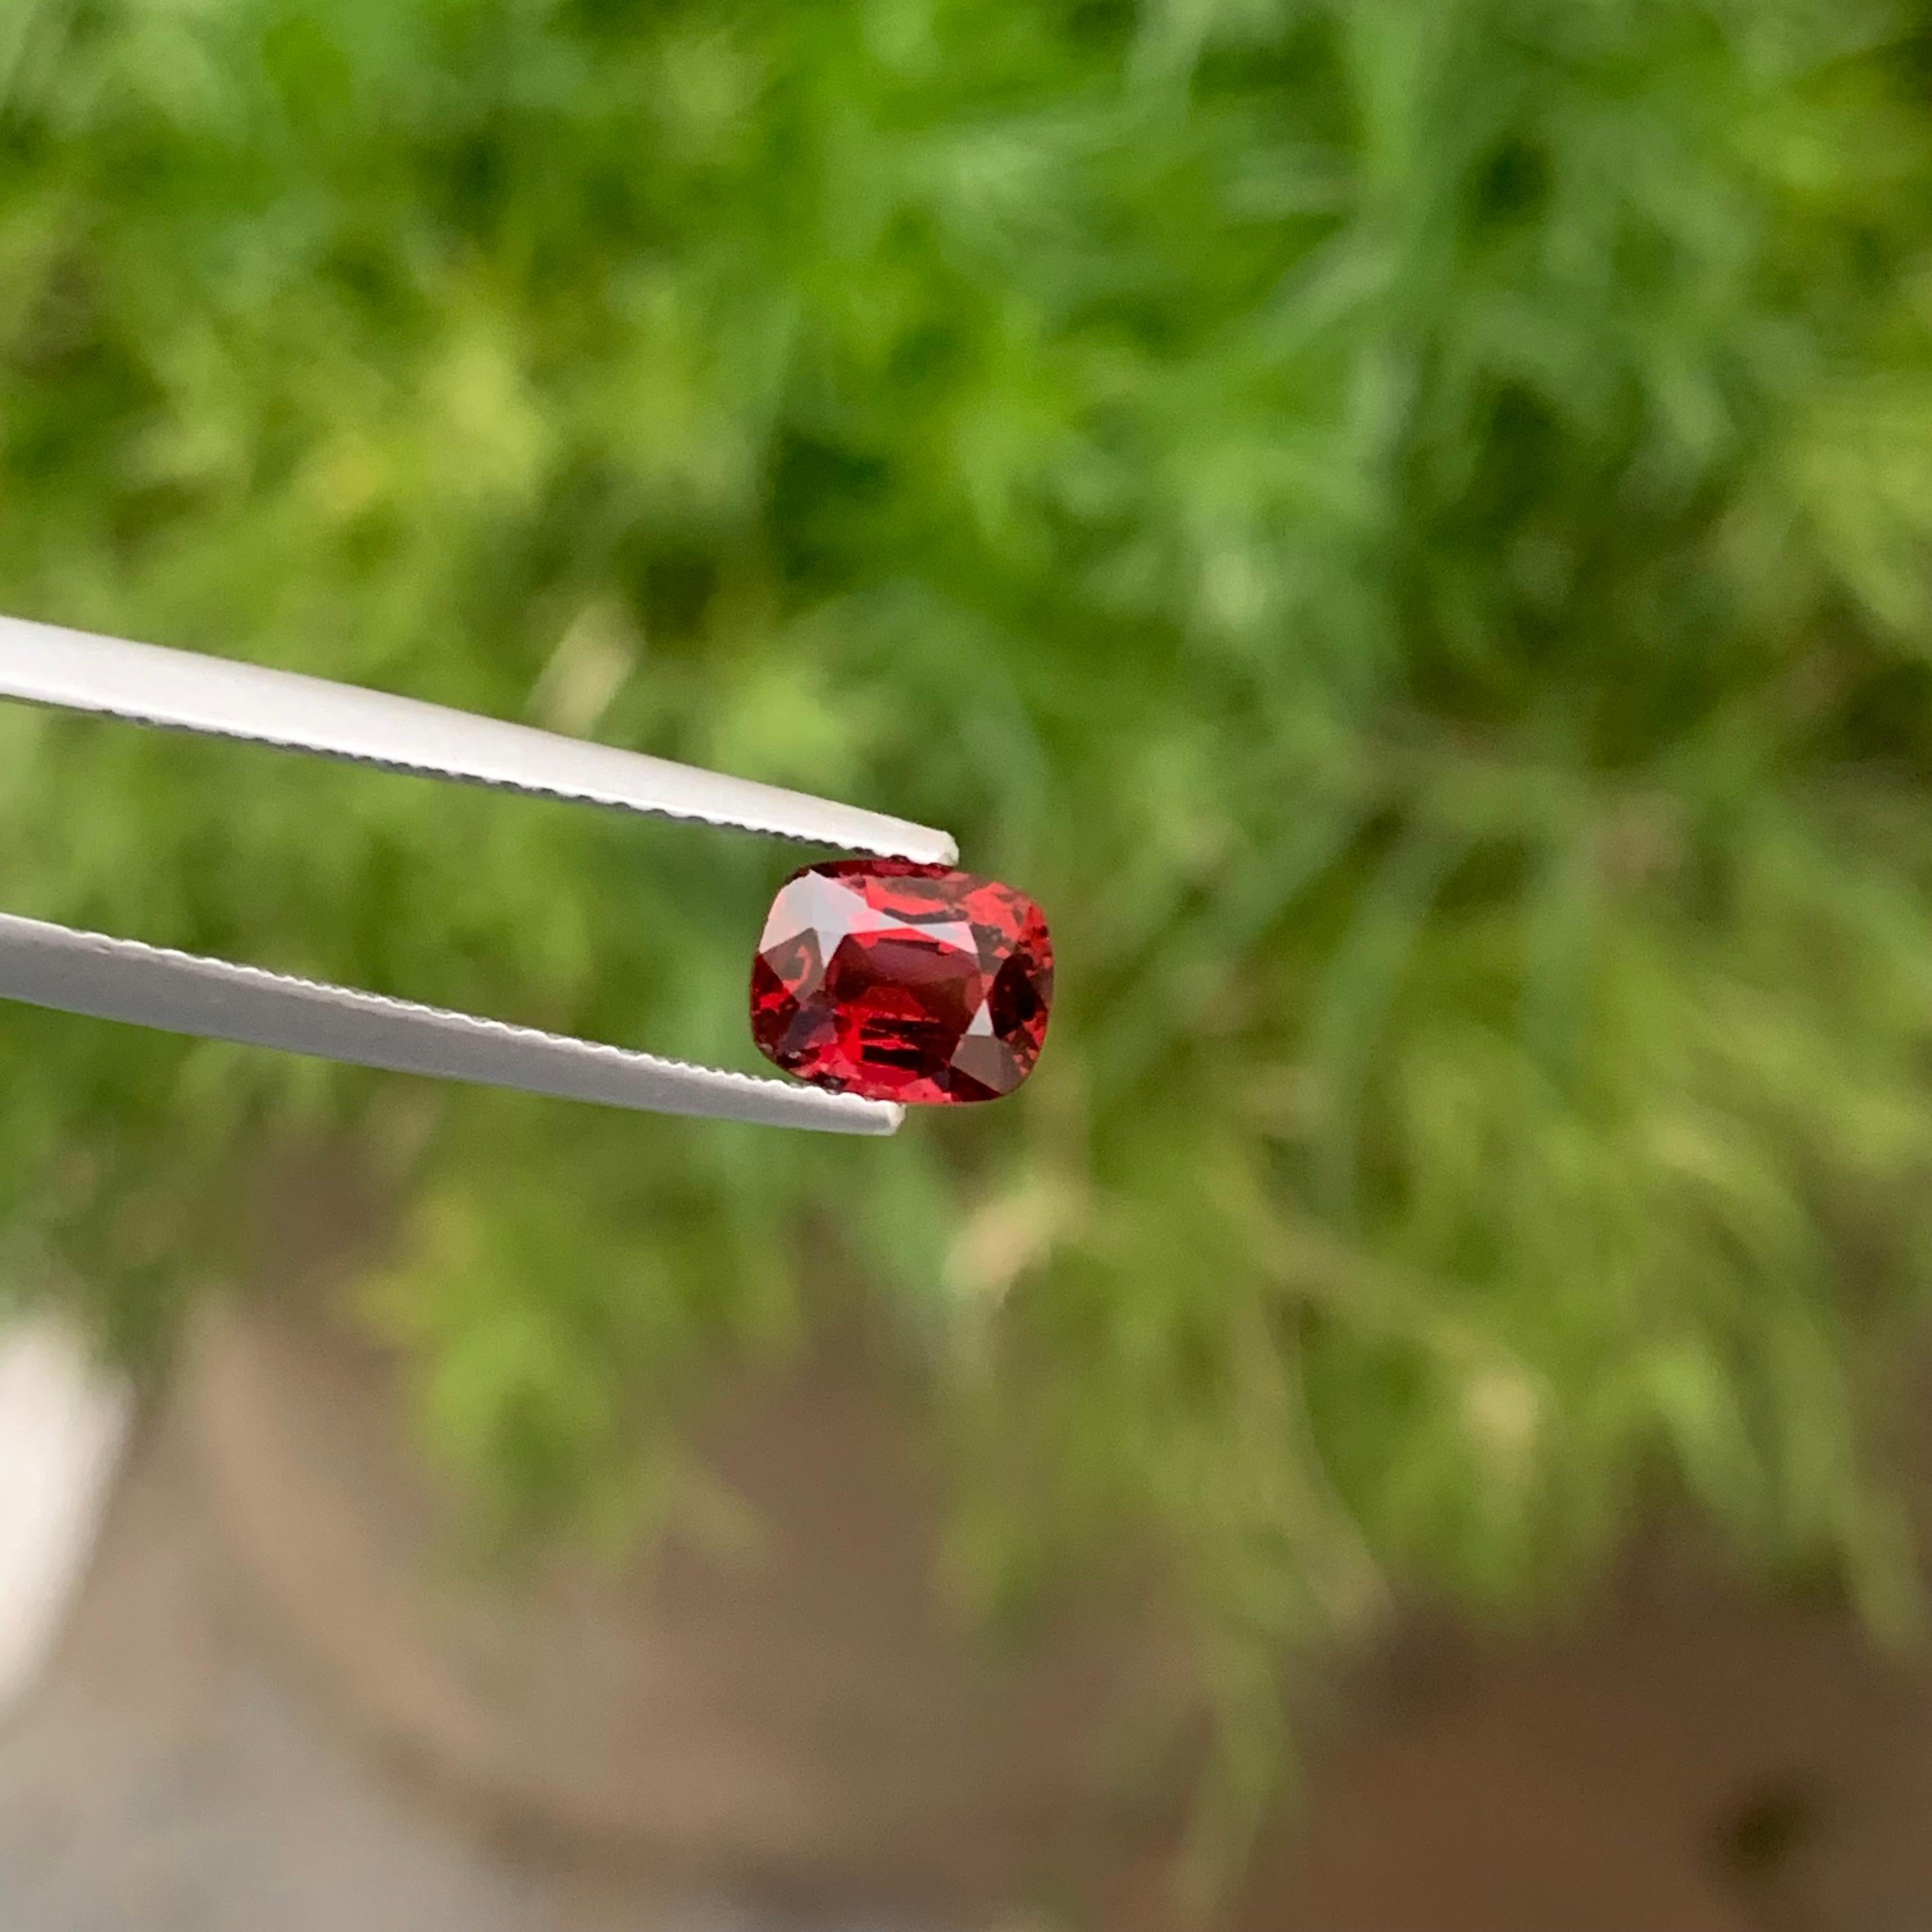 Gorgeous Loose Spinel
Weight: 1.15 Carats
Dimension: 6.9x5.5x3.7 Mm
Origin: Burma
Color: Red
Shape: Cushion
Treatment: Non
Certificate : on demand
.
Spinel gems are said to help set aside egos and become devoted to another person. Like most fiery